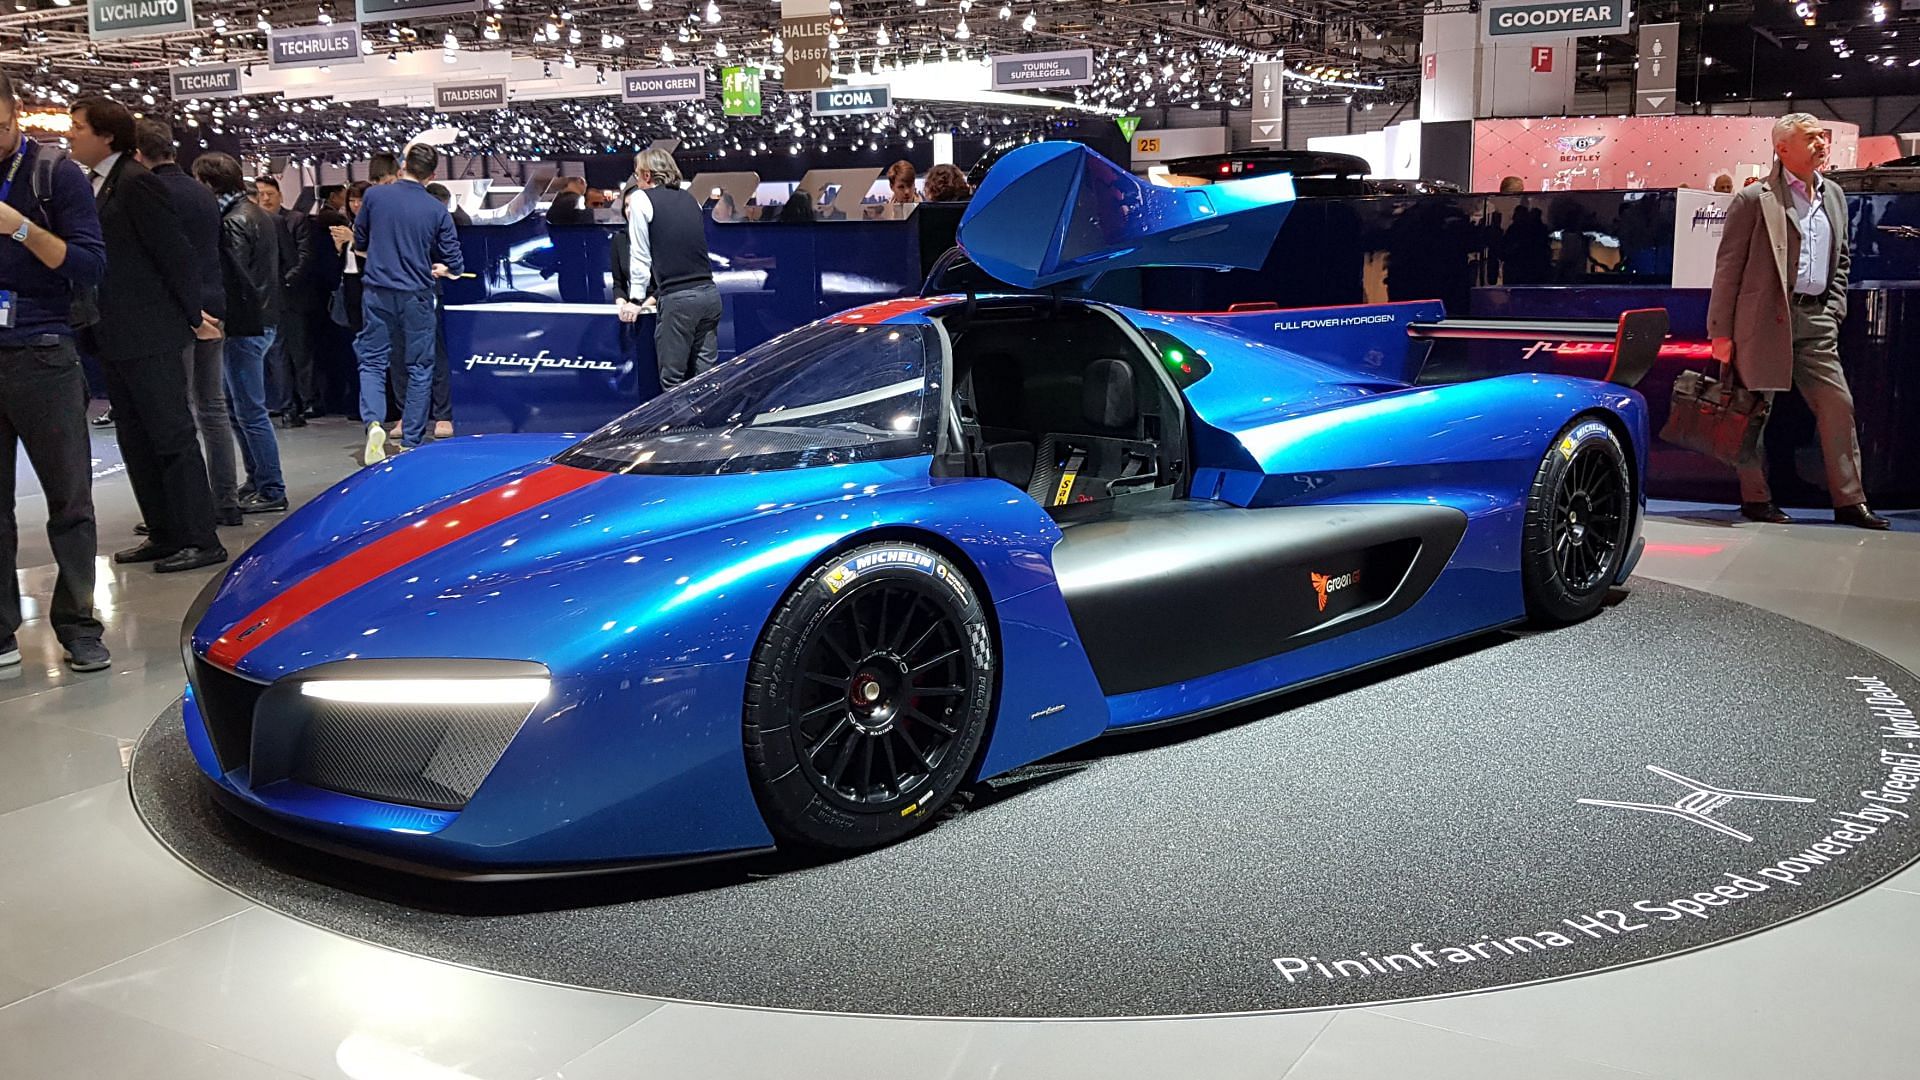 The hydrogen-powered Pininfarina H2 Speed at the Geneva Motor Show 2018. Photo for representative purposes only.&nbsp;